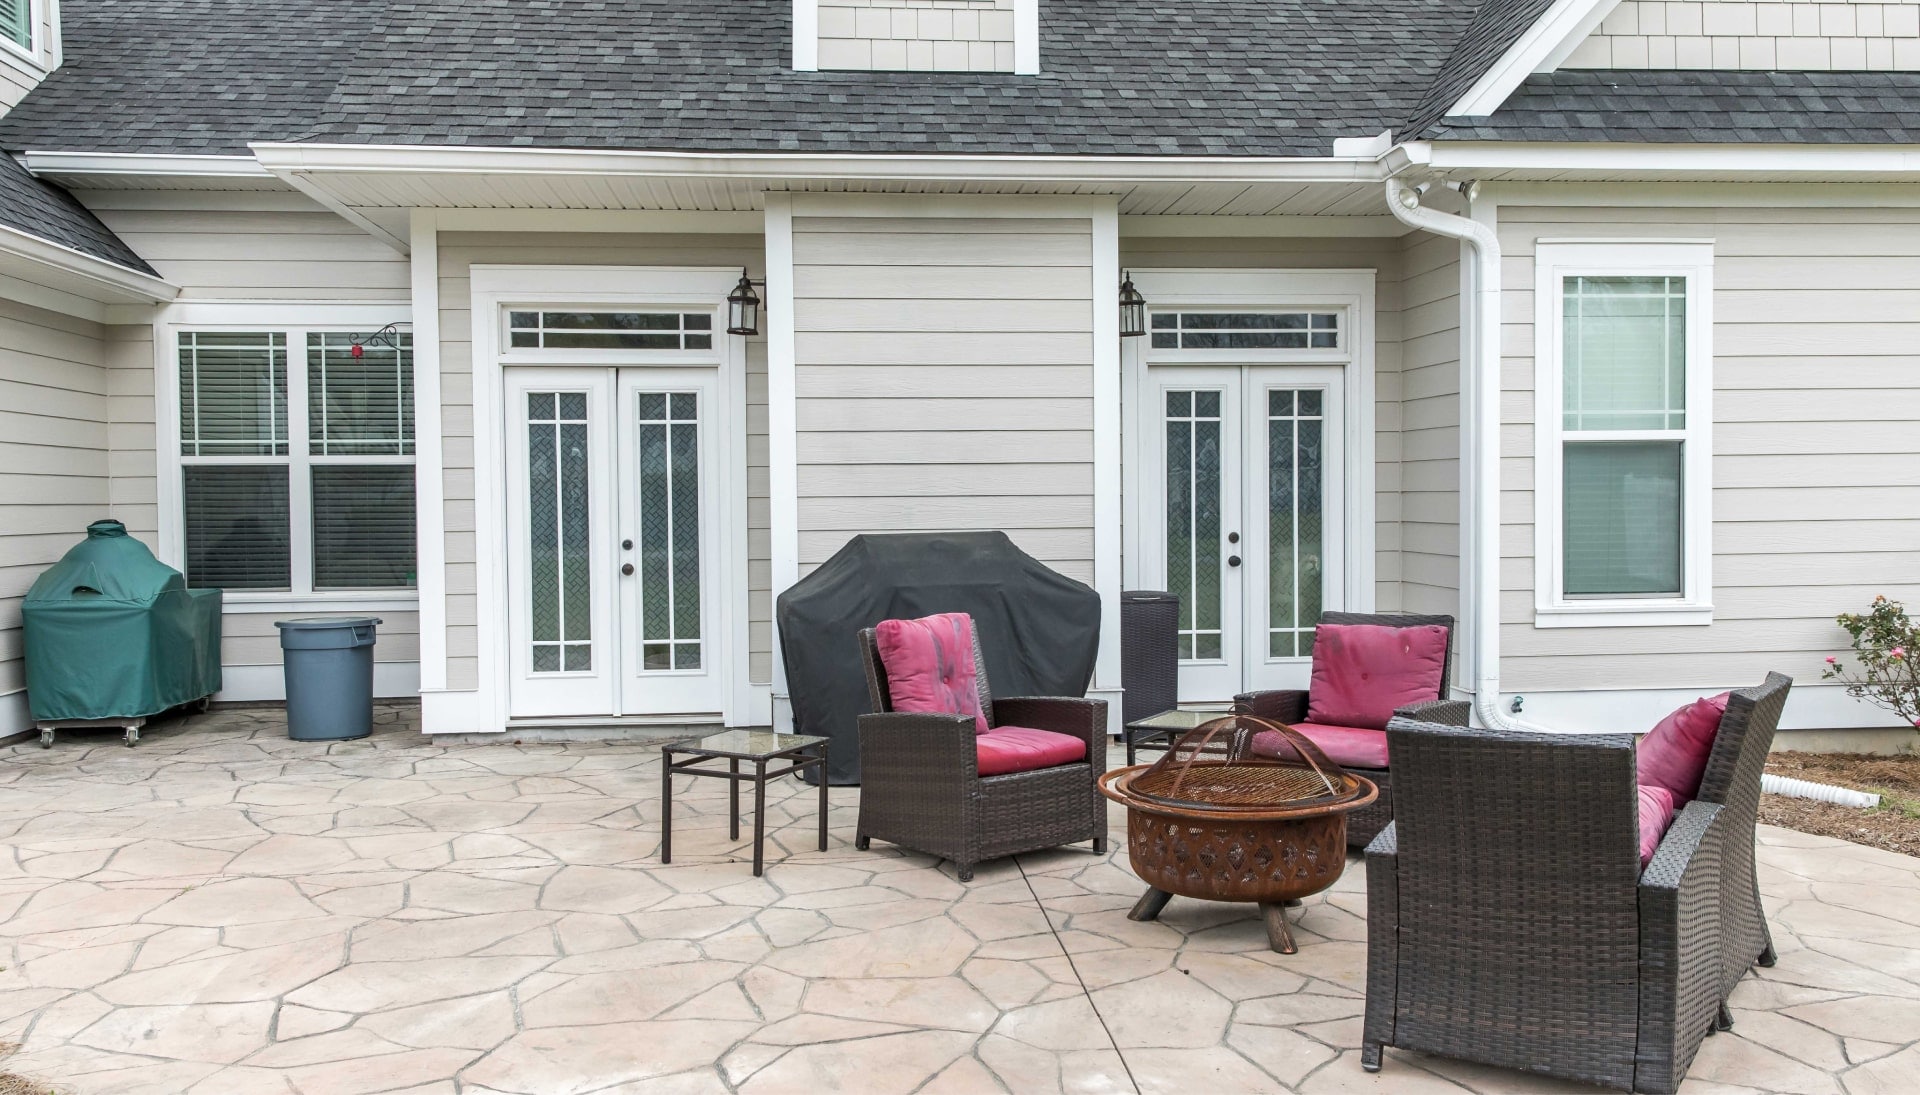 Elevate Your Outdoor Living Space with Stunning Stamped Concrete Patio in Topeka, KS - Choose from a Variety of Creative Patterns and Colors to Achieve a Unique and Eye-Catching Look for Your Patio with Long-Lasting Durability and Low-Maintenance.